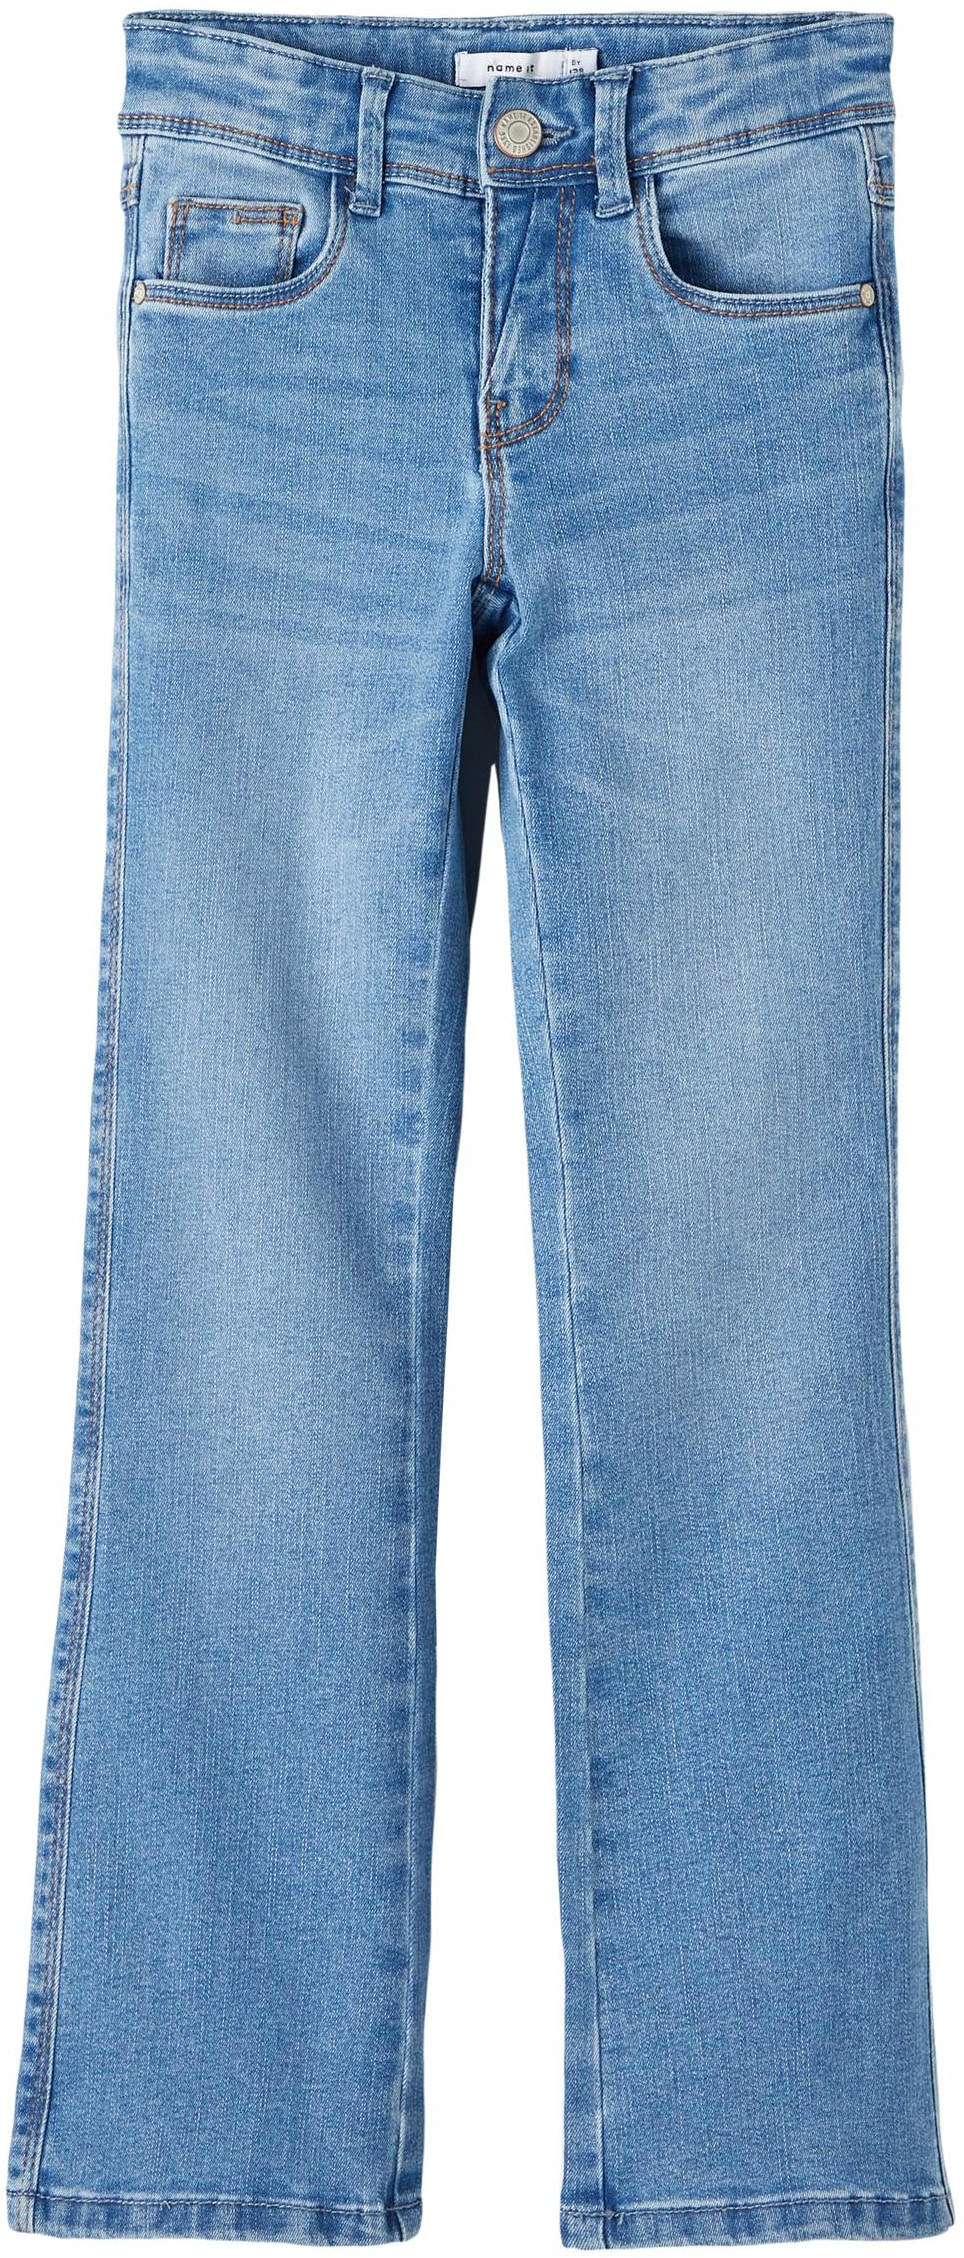 OTTO »NKFPOLLY Name Stretch mit kaufen SKINNY NOOS«, bei It BOOT 1142-AU Bootcut-Jeans JEANS